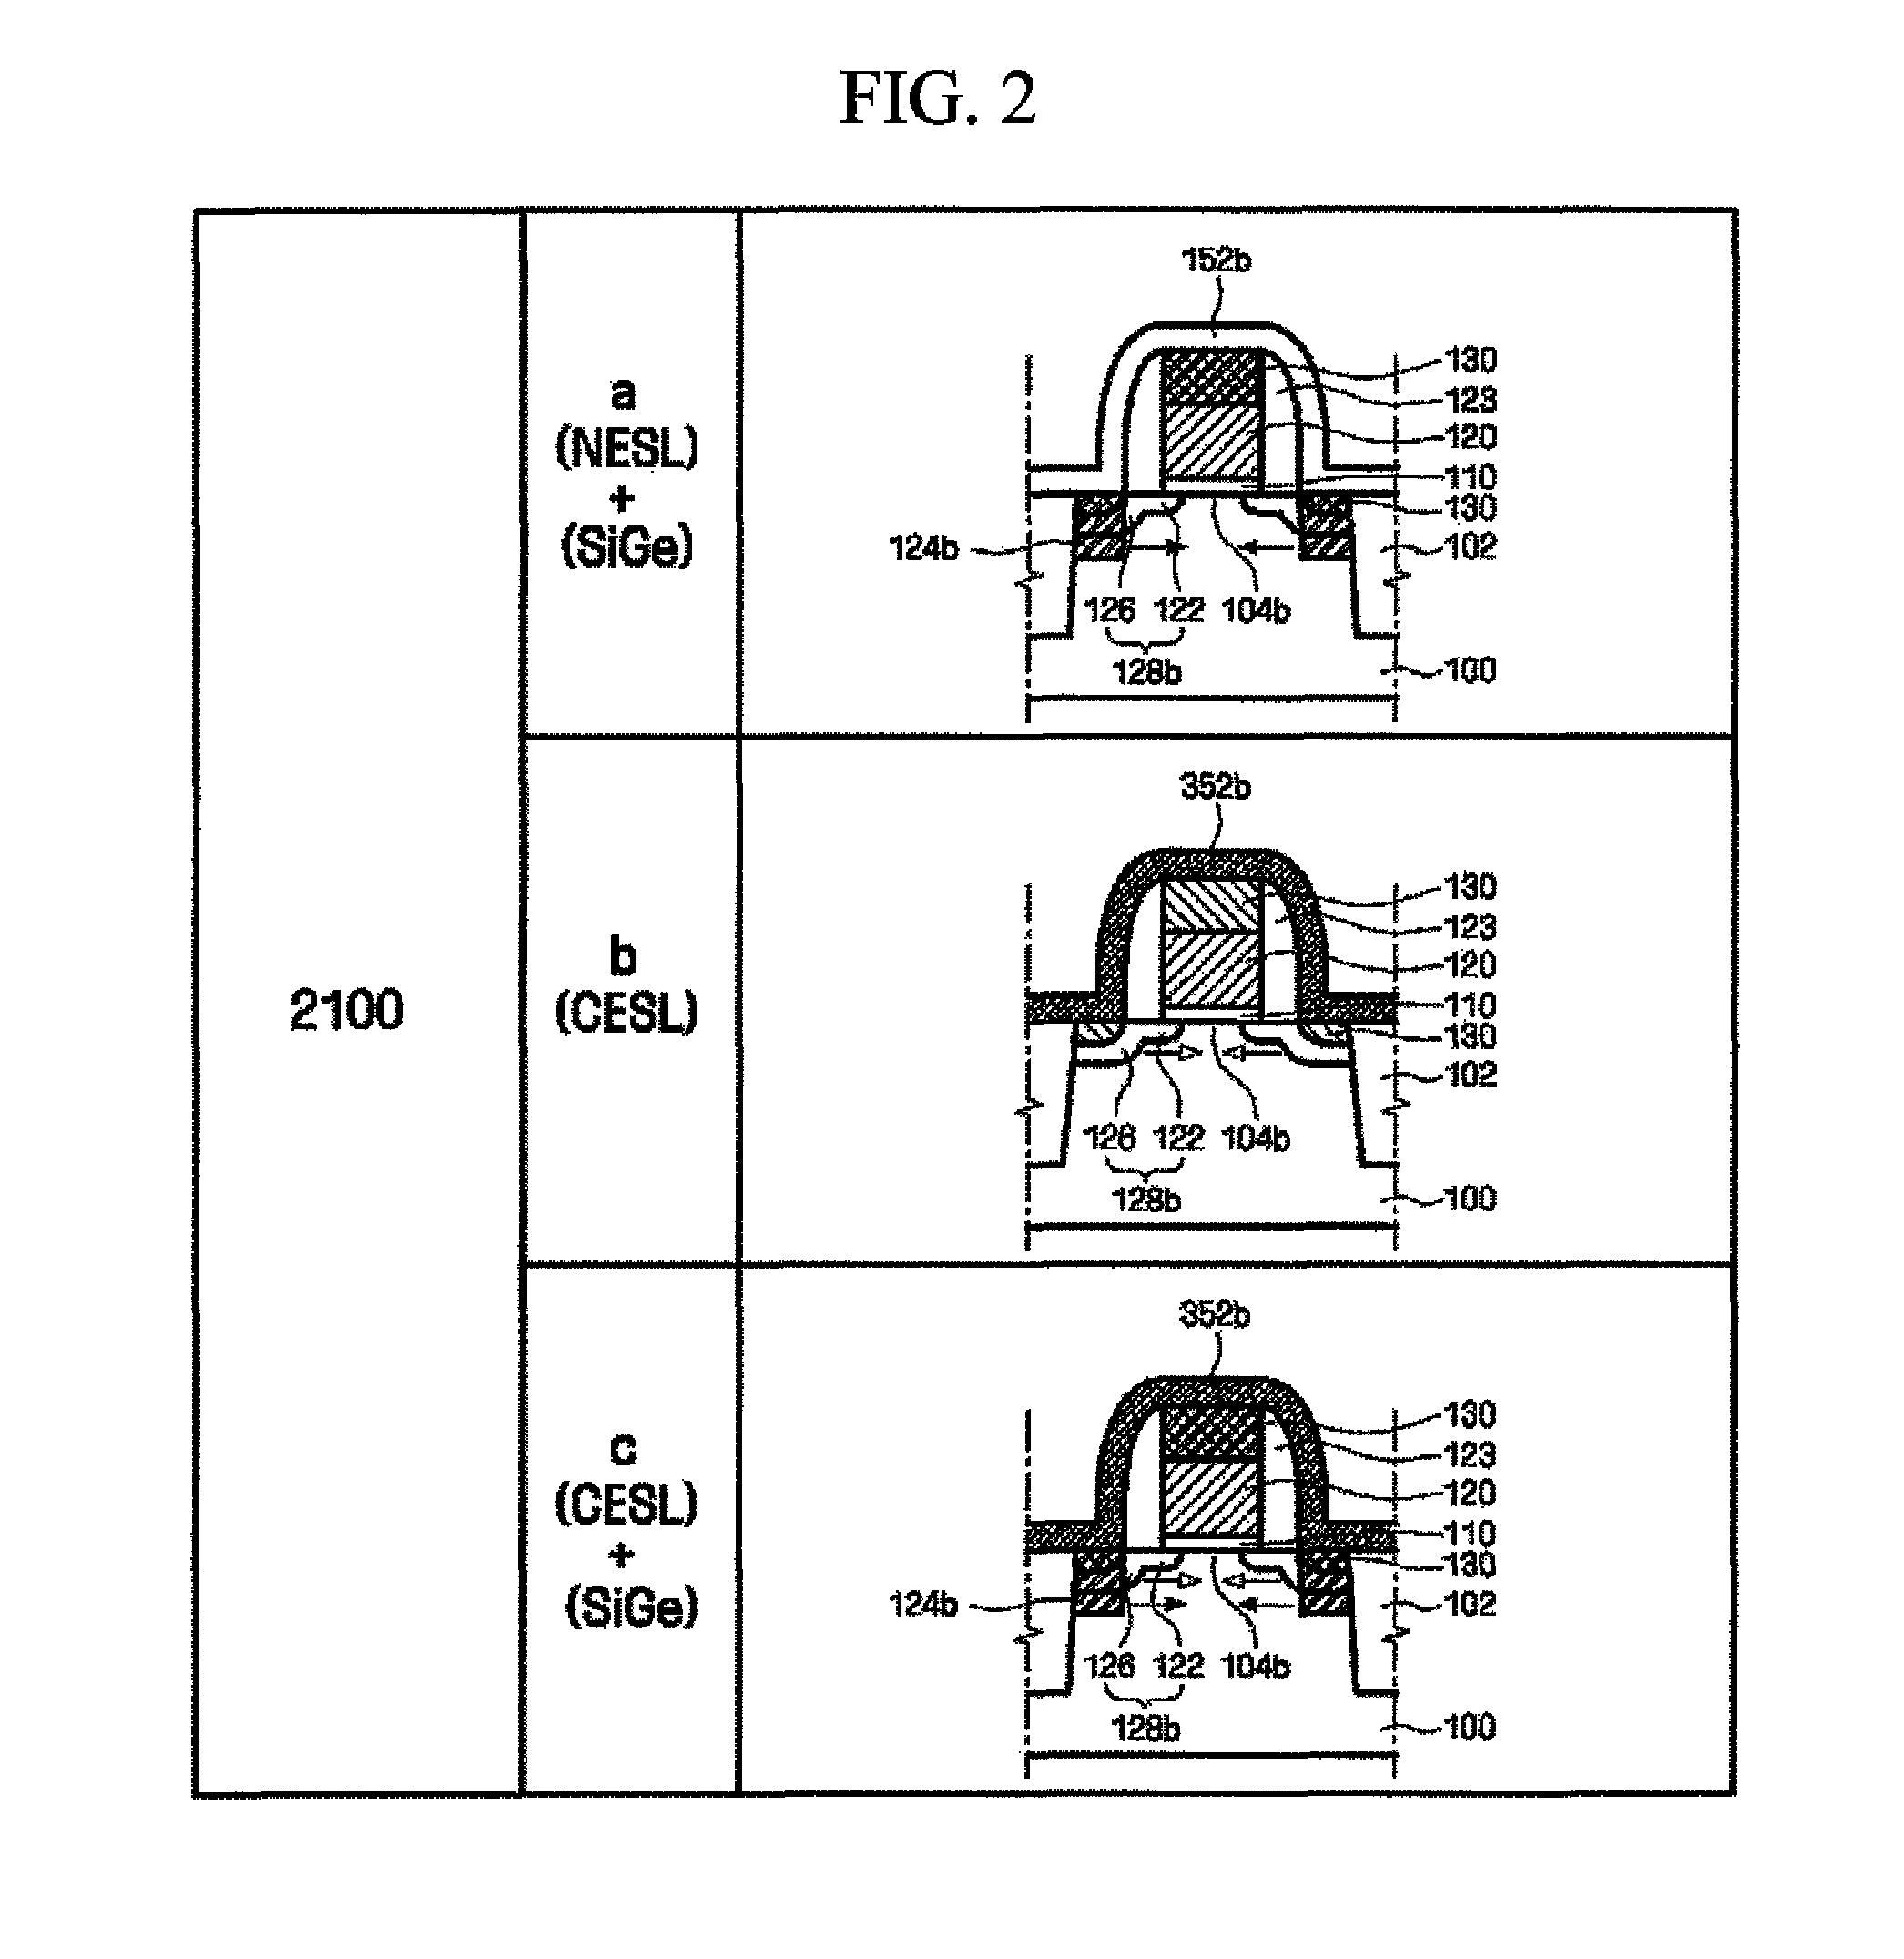 Semiconductor device having analog transistor with improved operating and flicker noise characteristics and method of making same